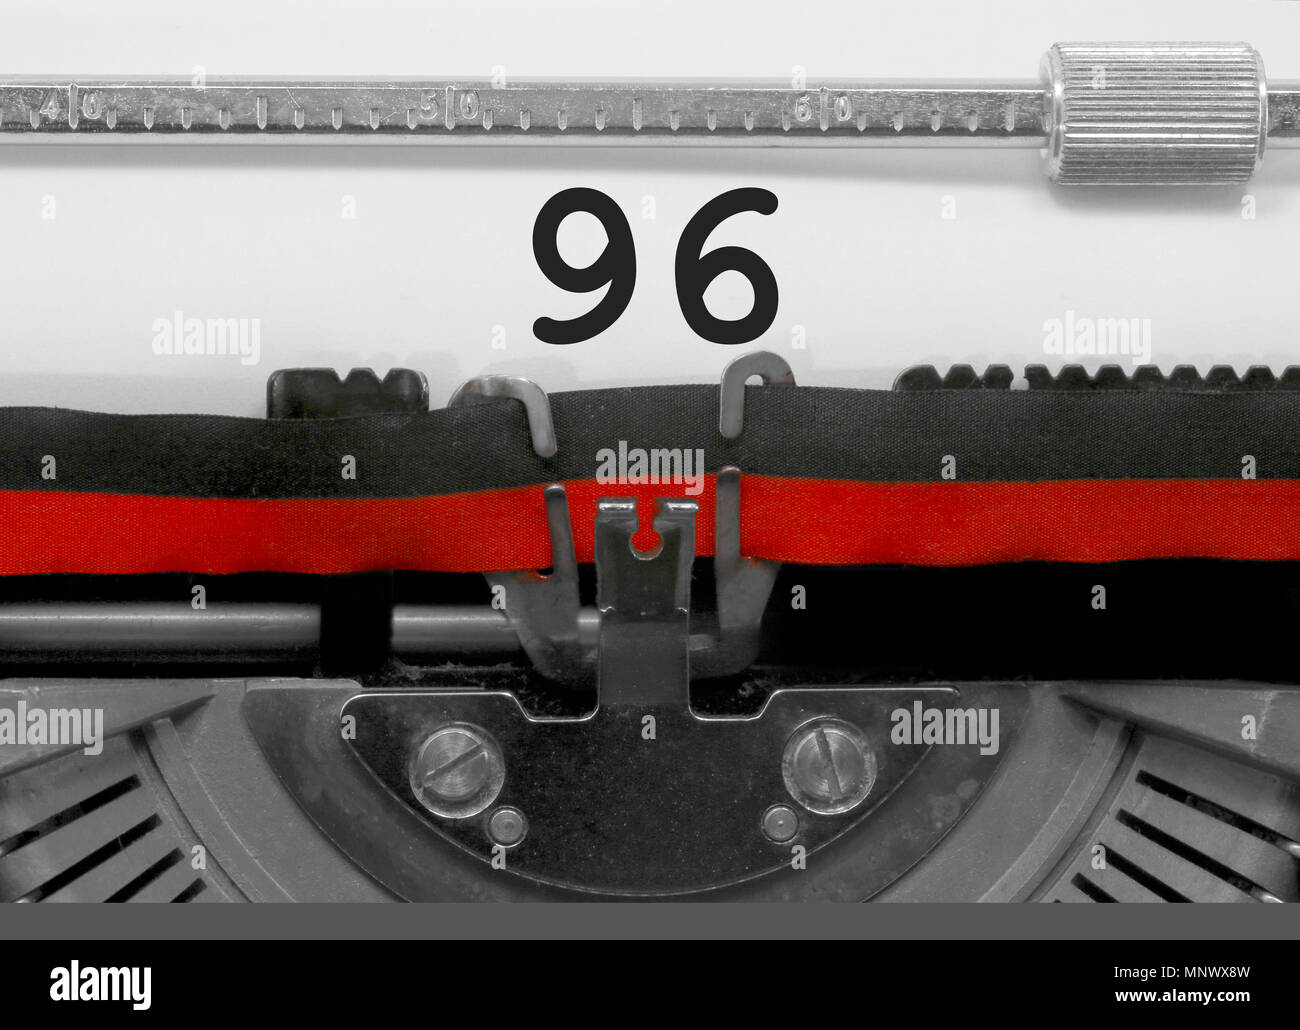 96 Number text written by an old typewriter on white sheet Stock Photo